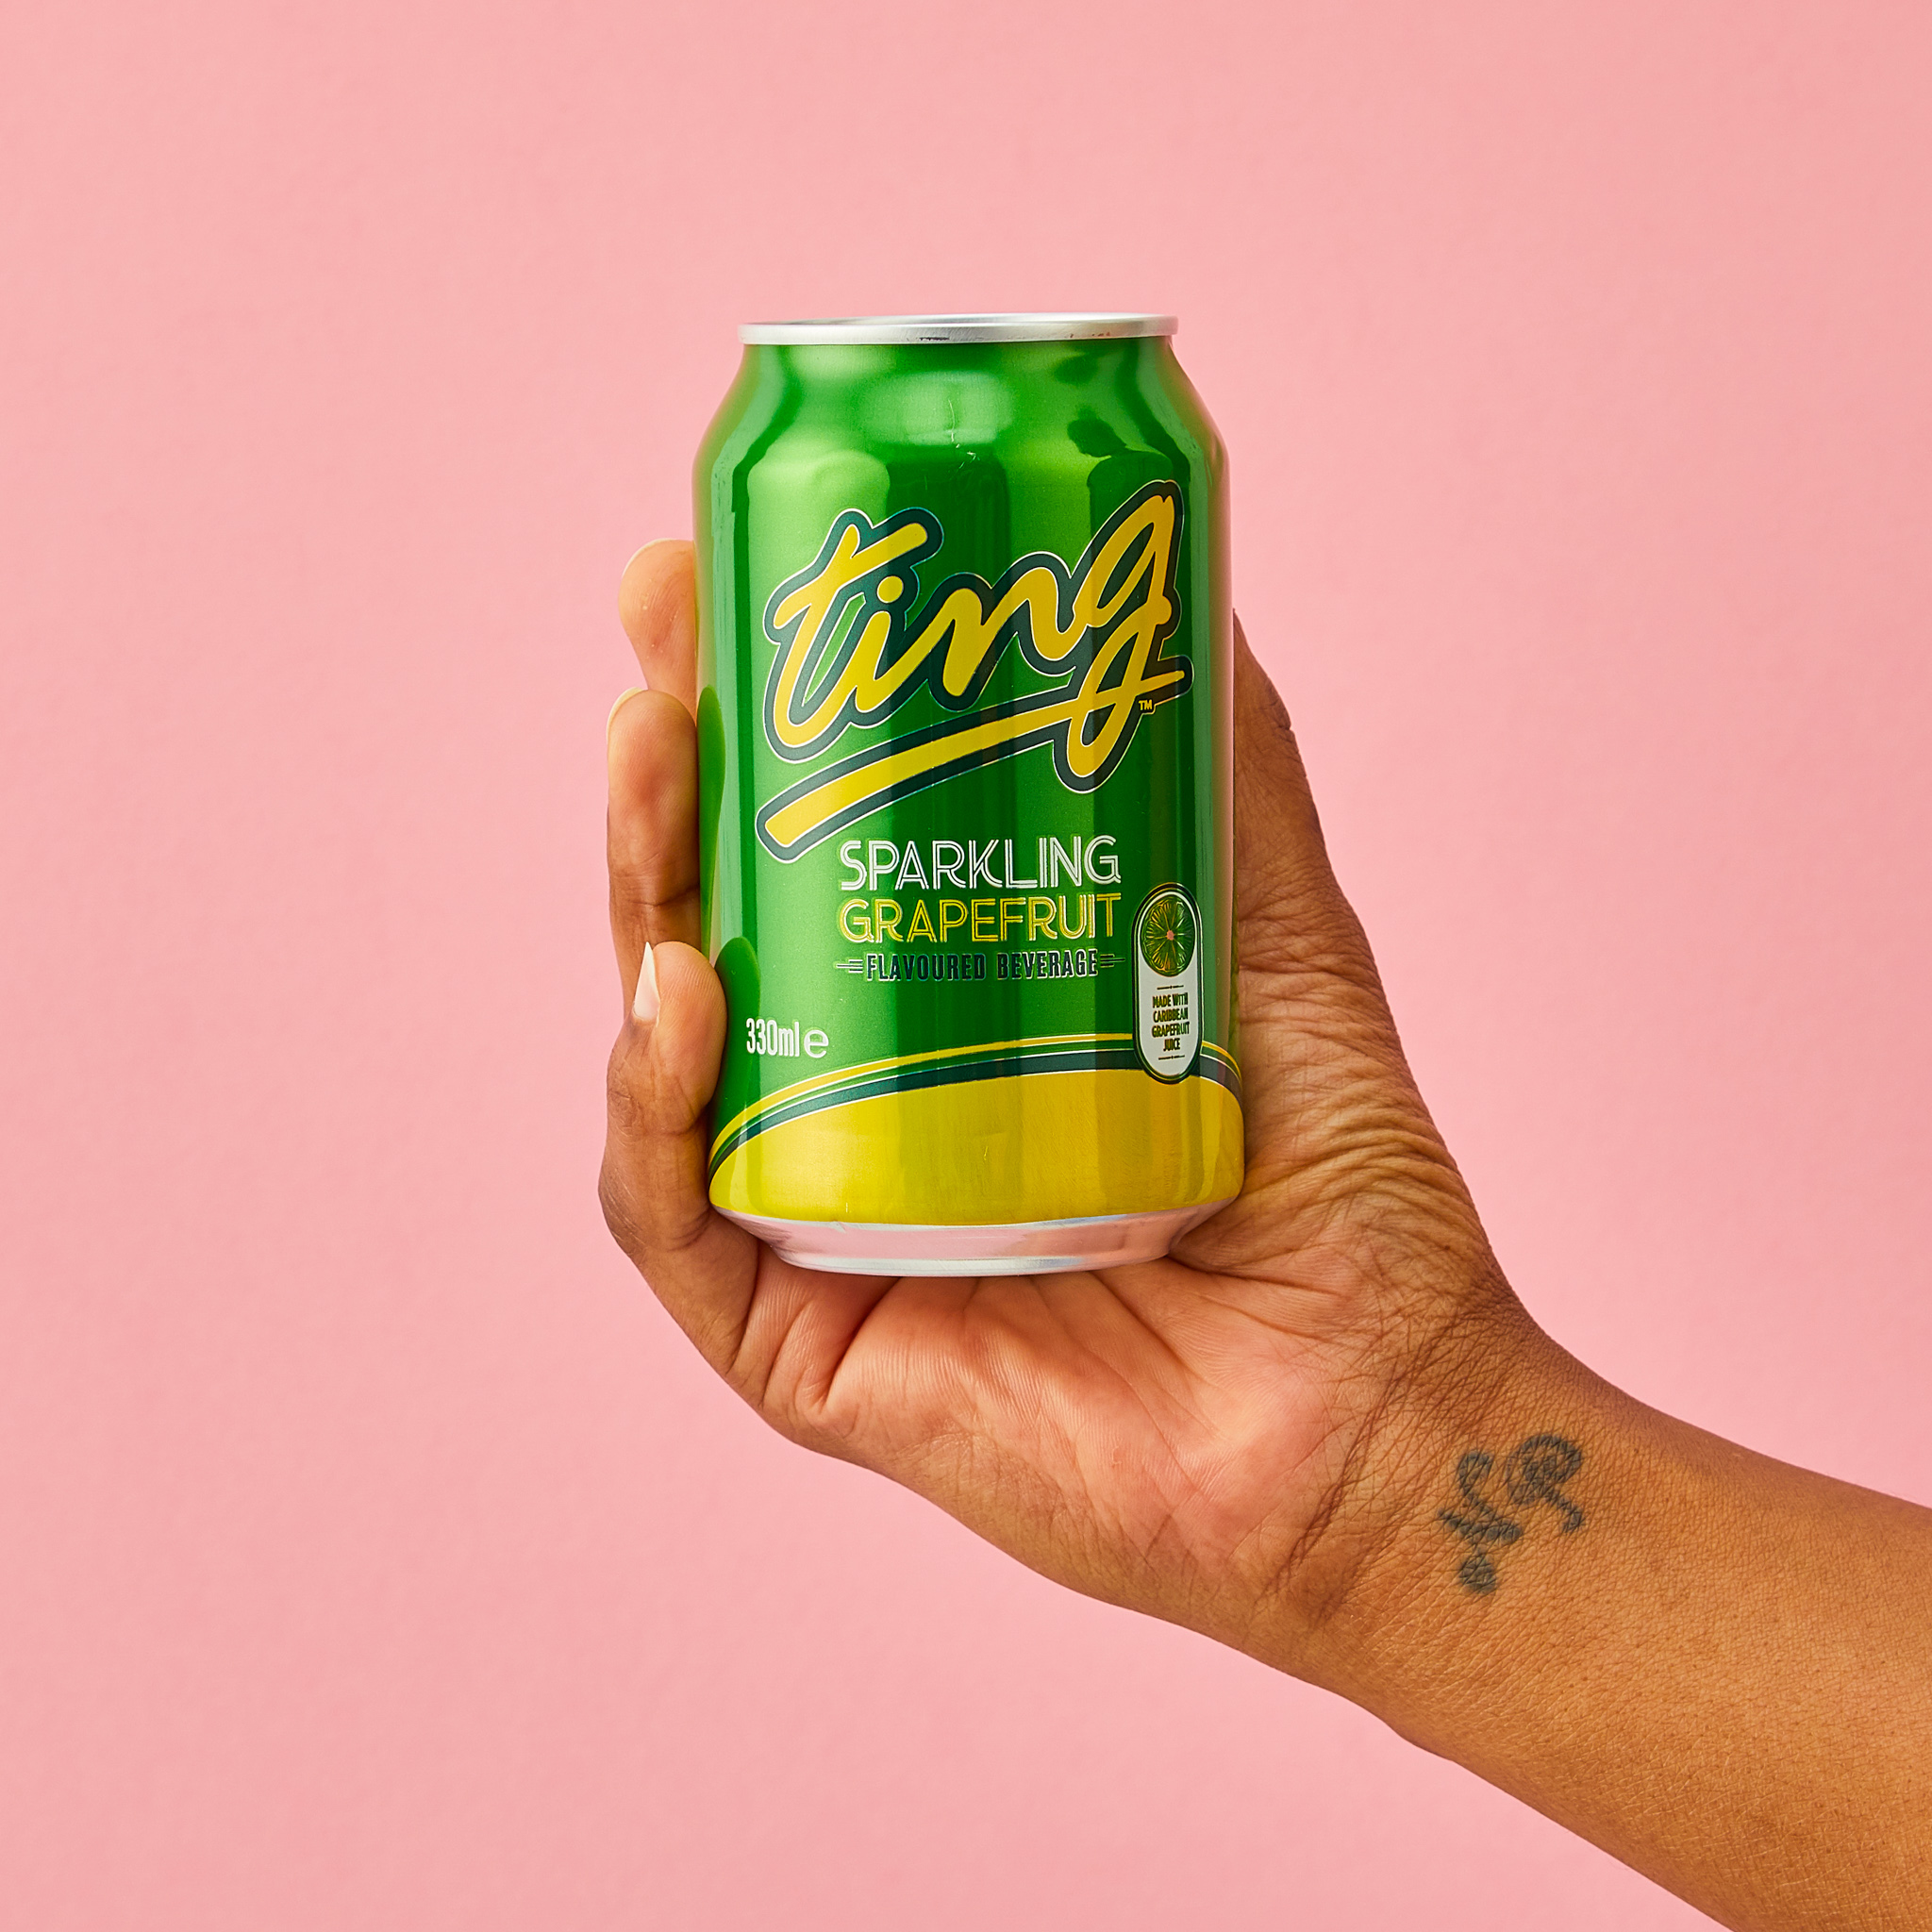 ting launches collaborative marketing campaign